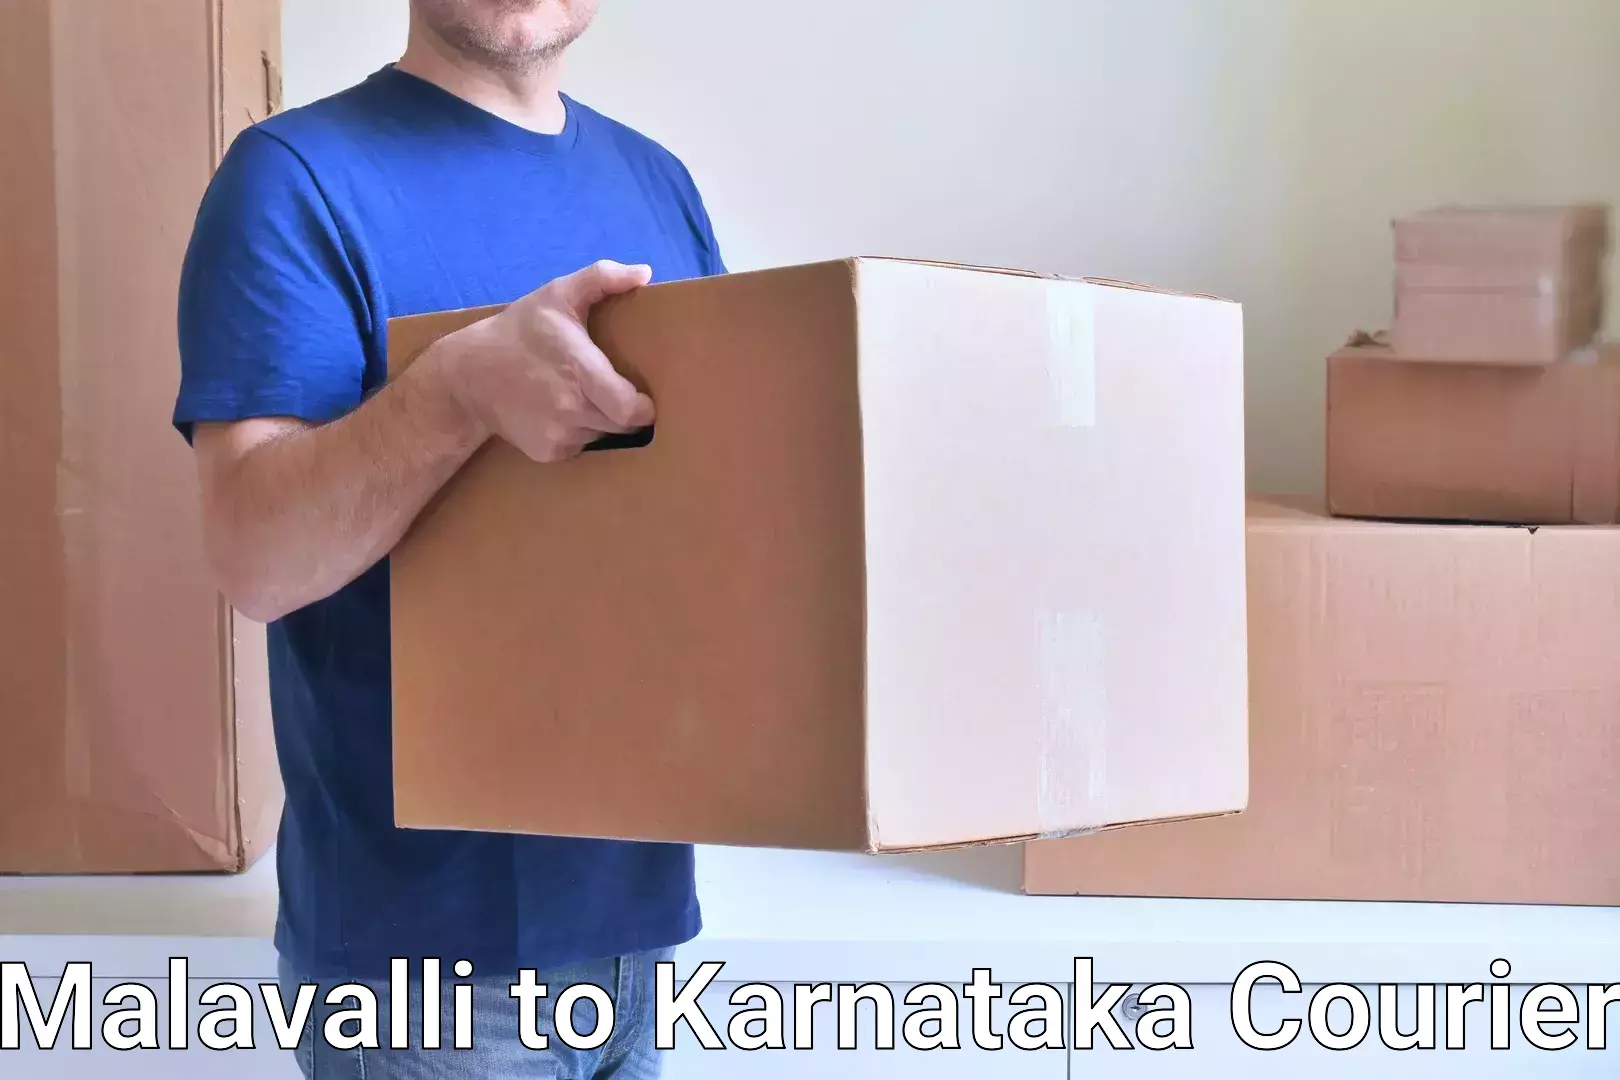 Courier service efficiency in Malavalli to Virajpet